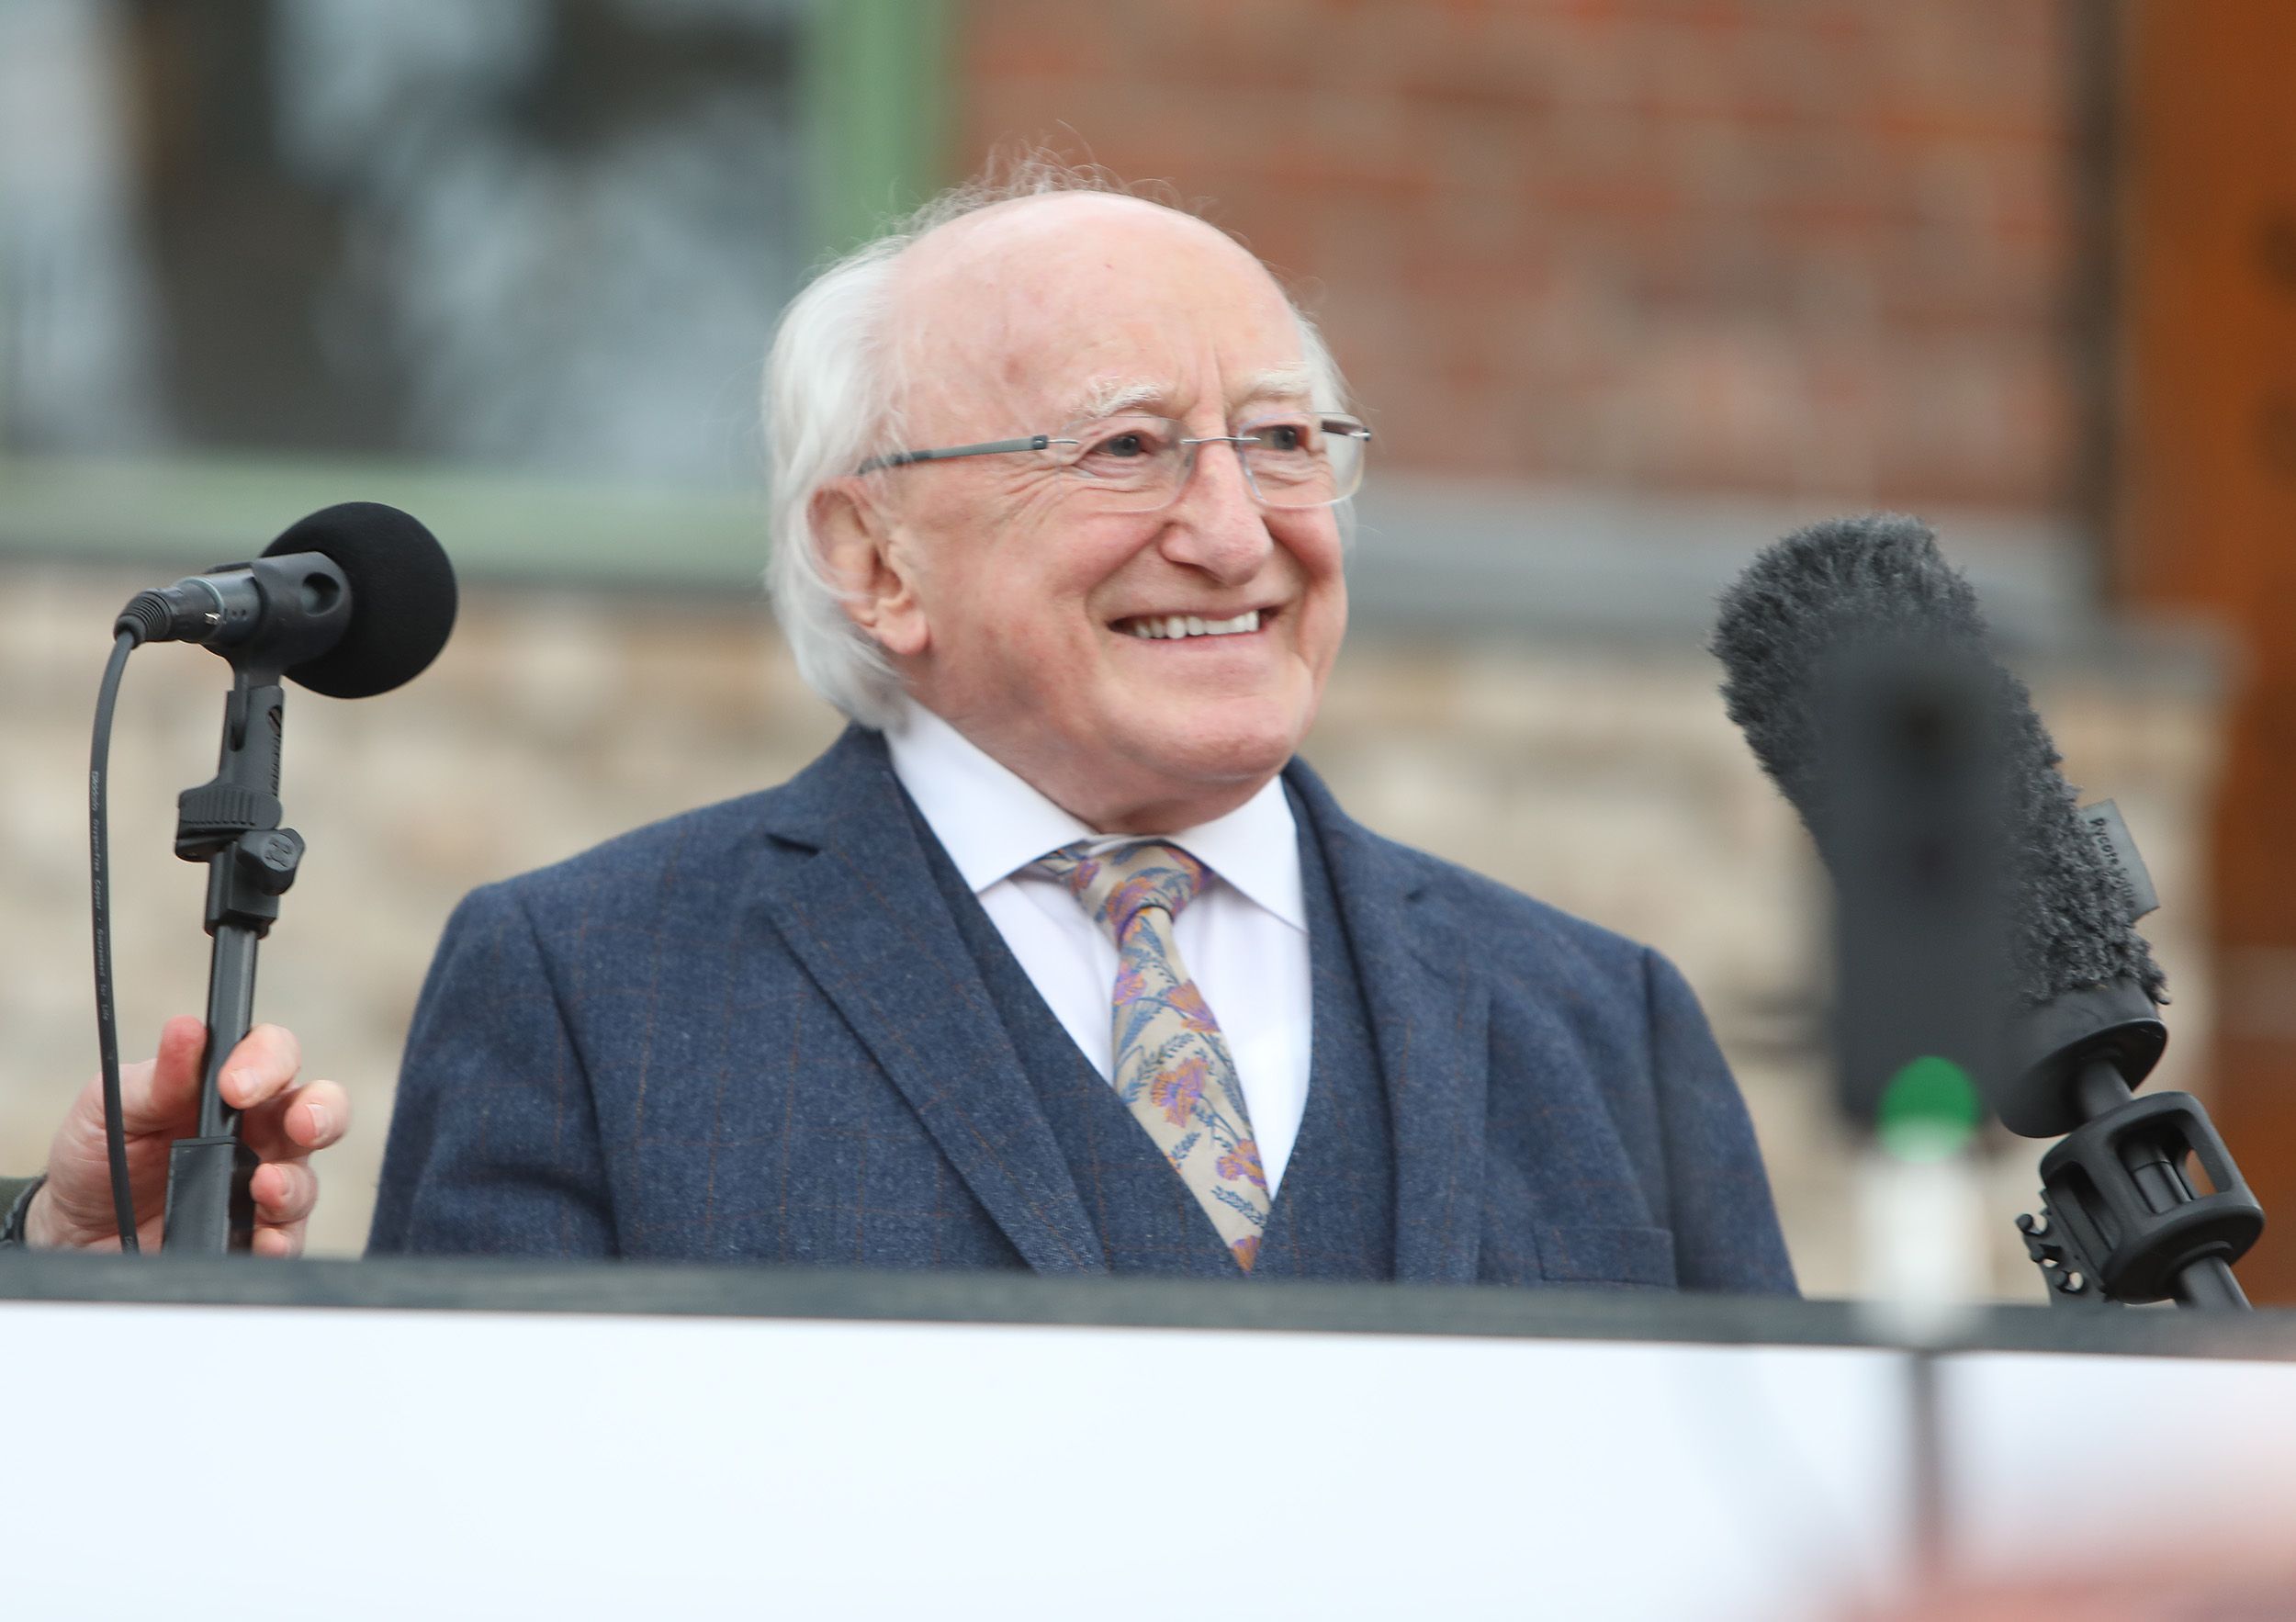 NO THANK YOU: President Higgins declined an invitation to attend the event in Armagh this week